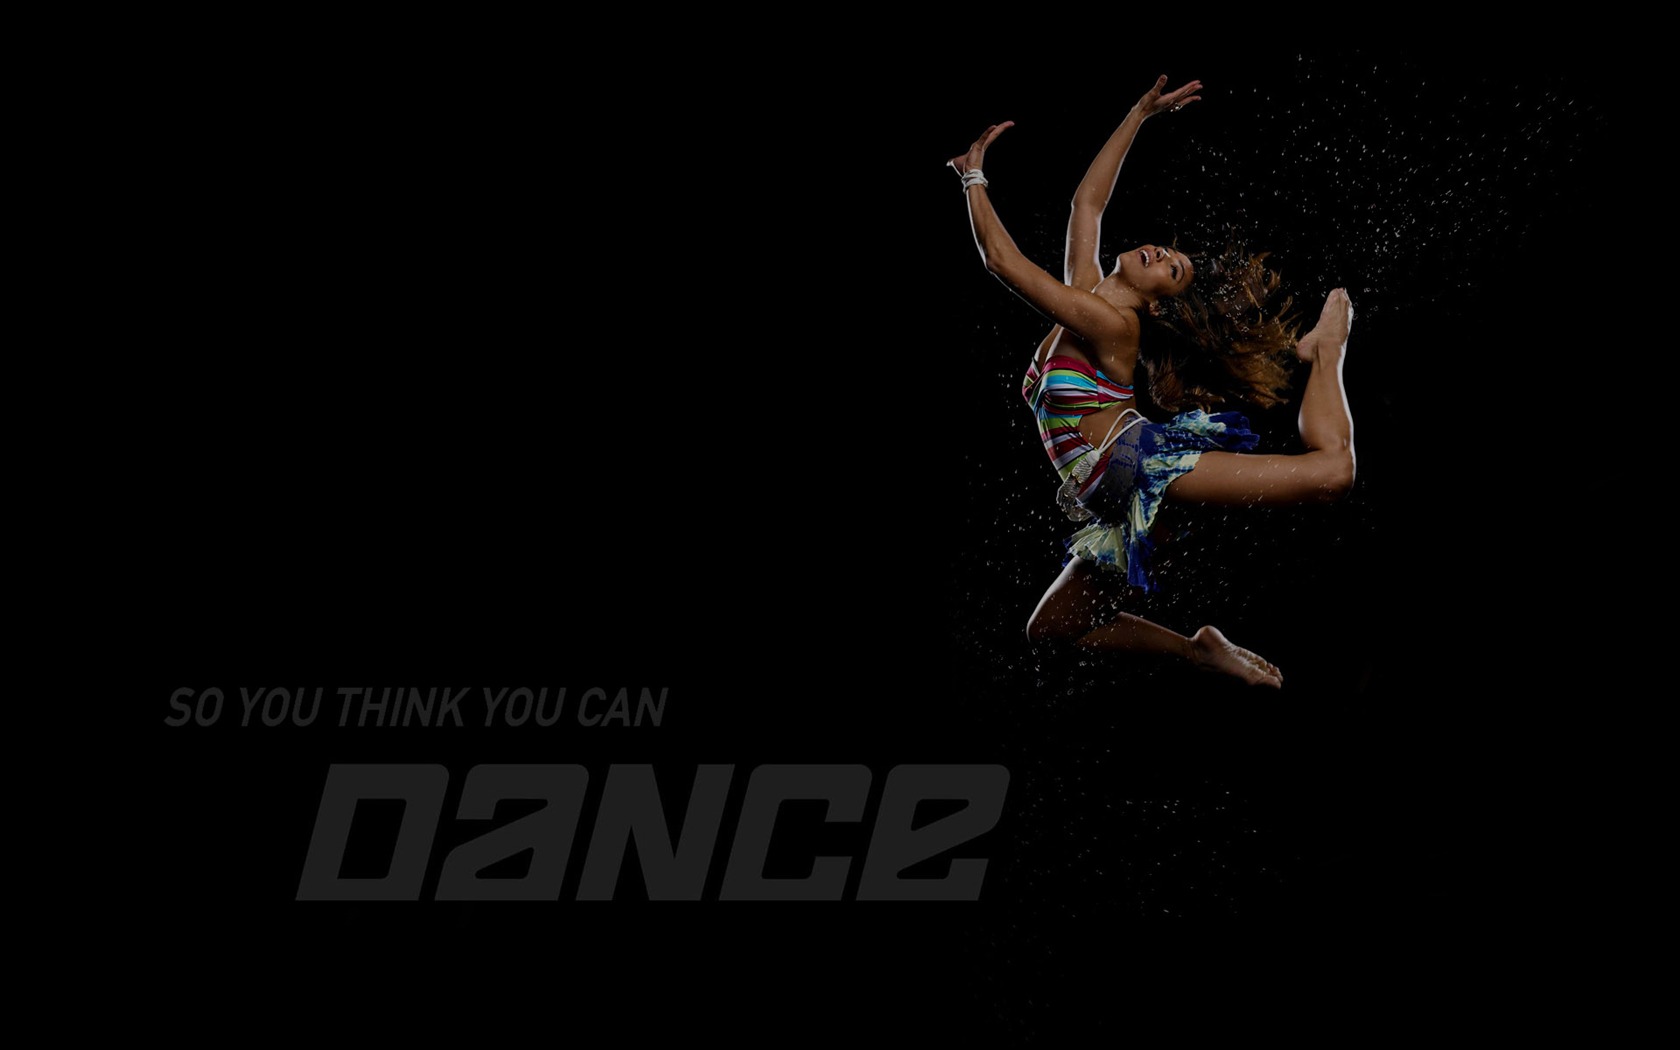 So You Think You Can Dance 舞林争霸 壁纸(二)17 - 1680x1050